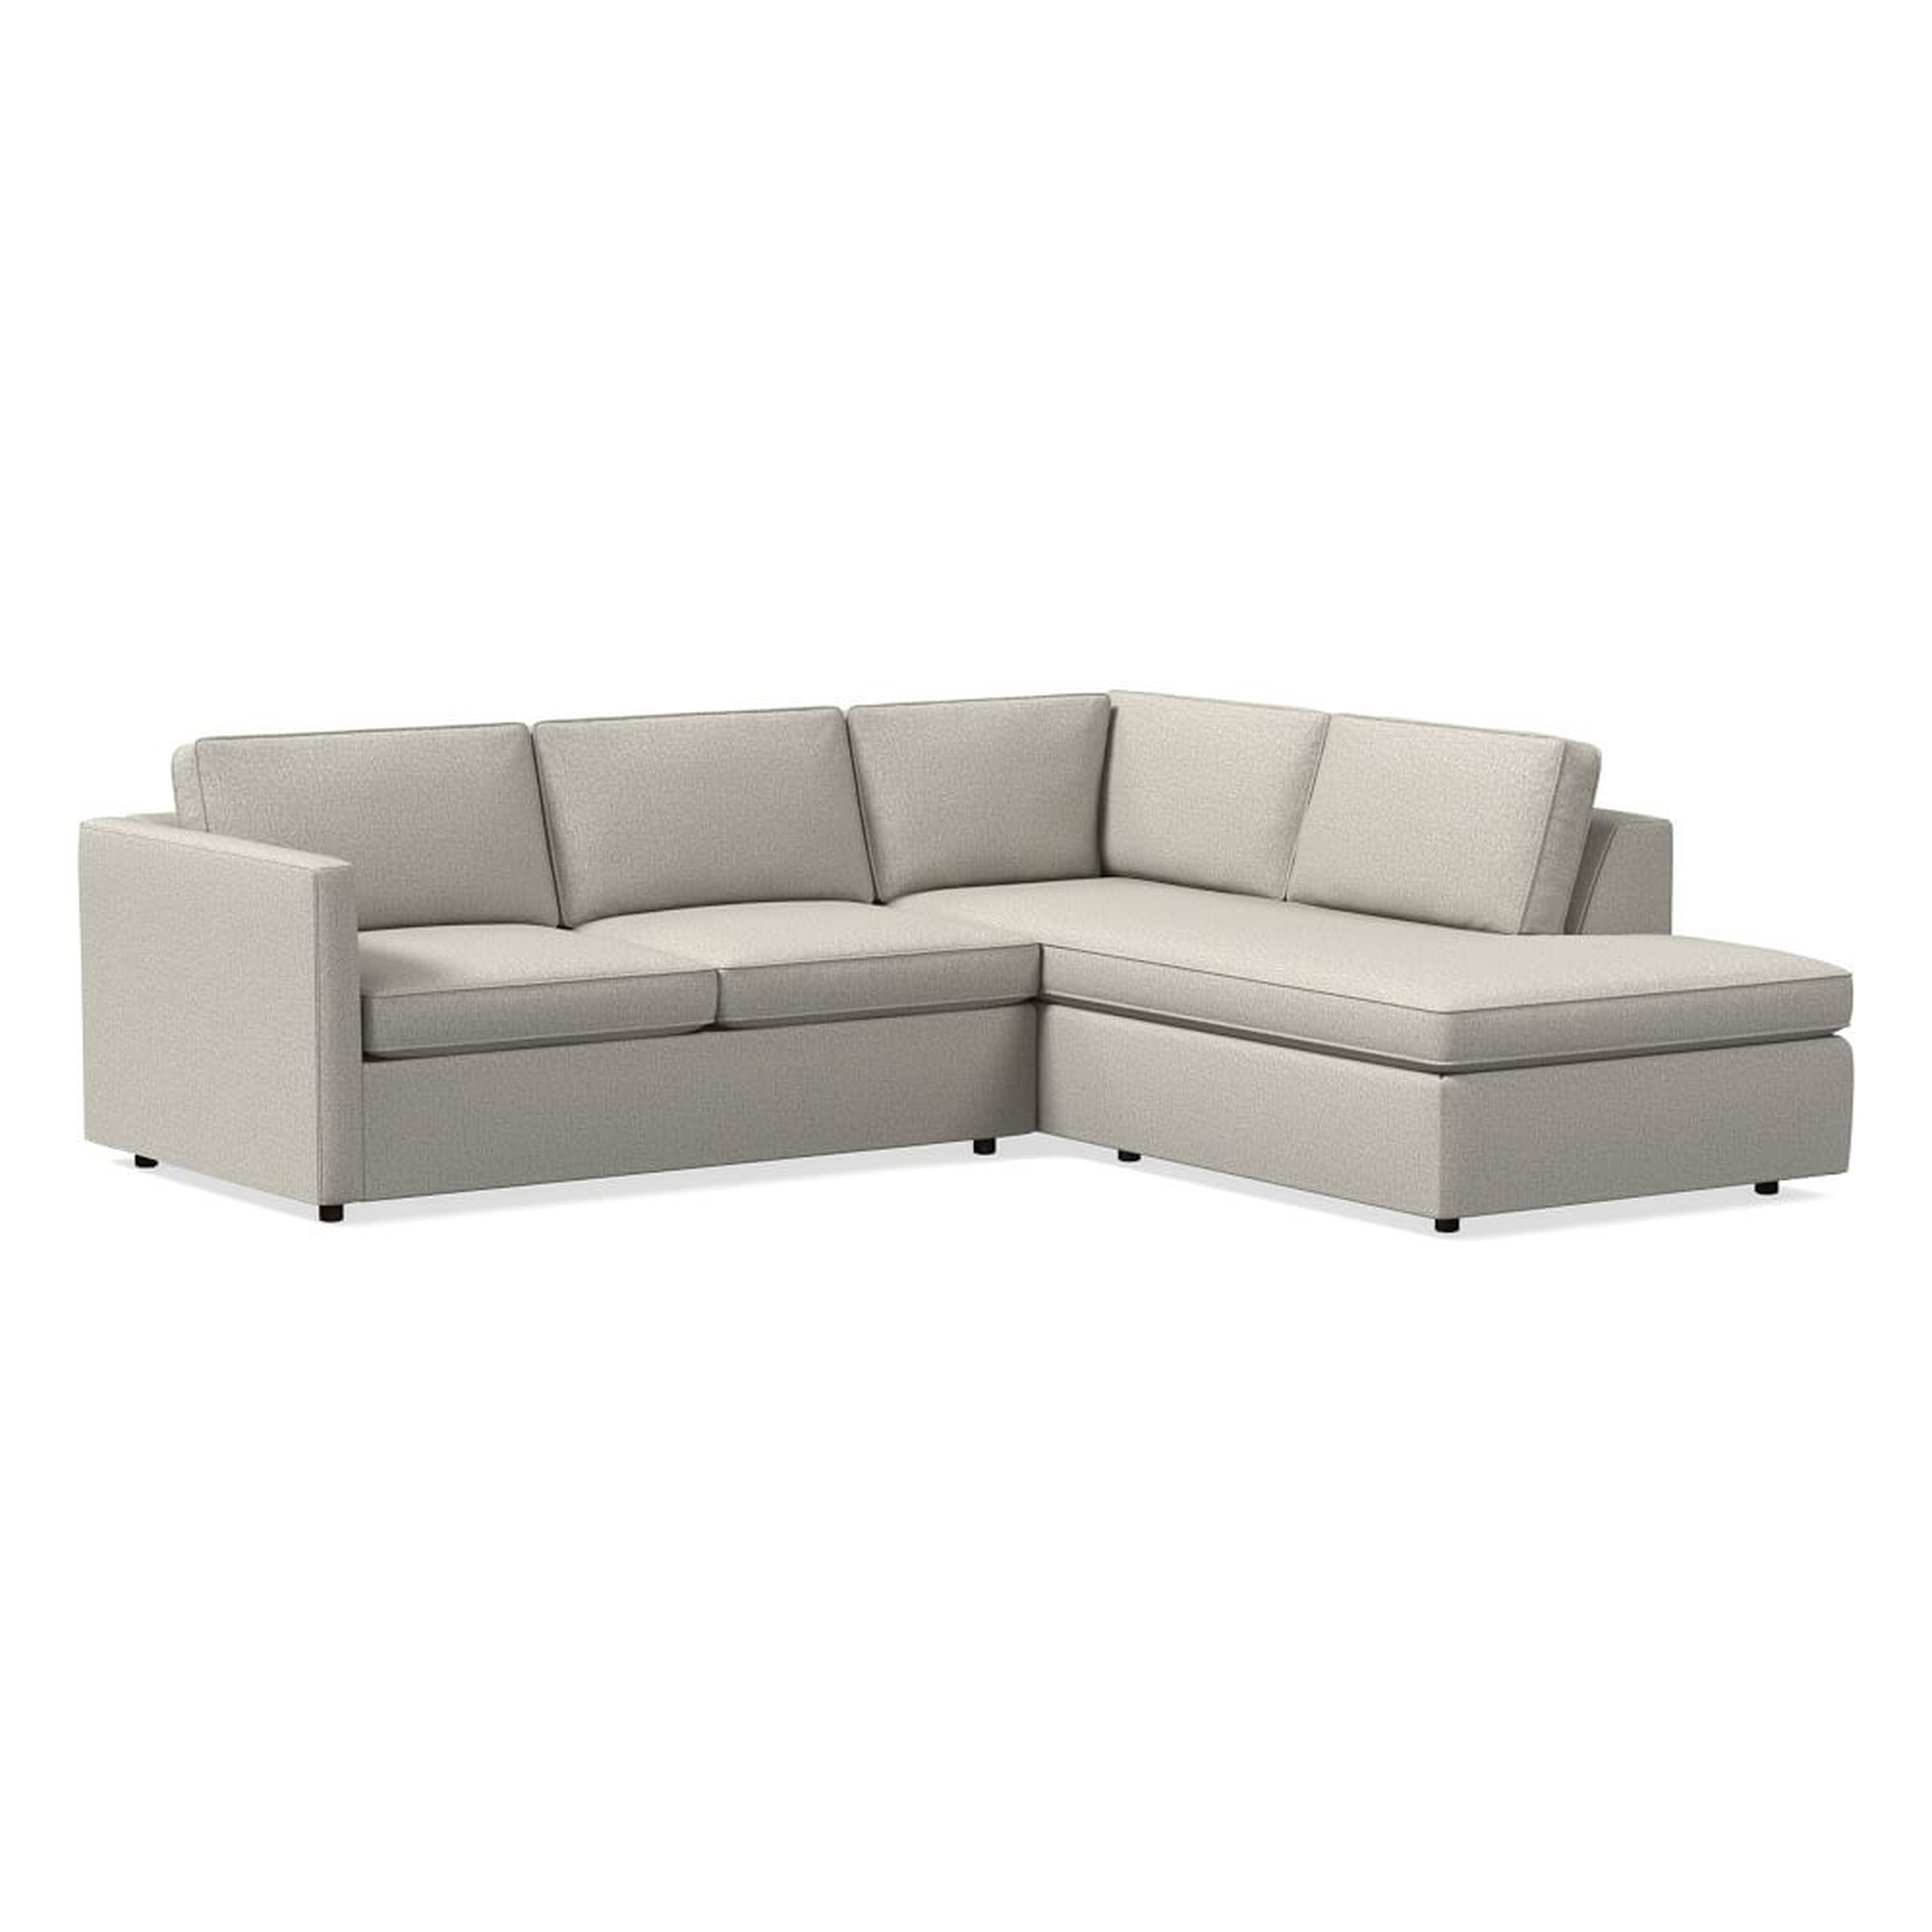 Harris Sectional Set 09: LA 65" Sofa, RA Terminal Chaise, Poly , Twill, Dove, Concealed Supports - West Elm